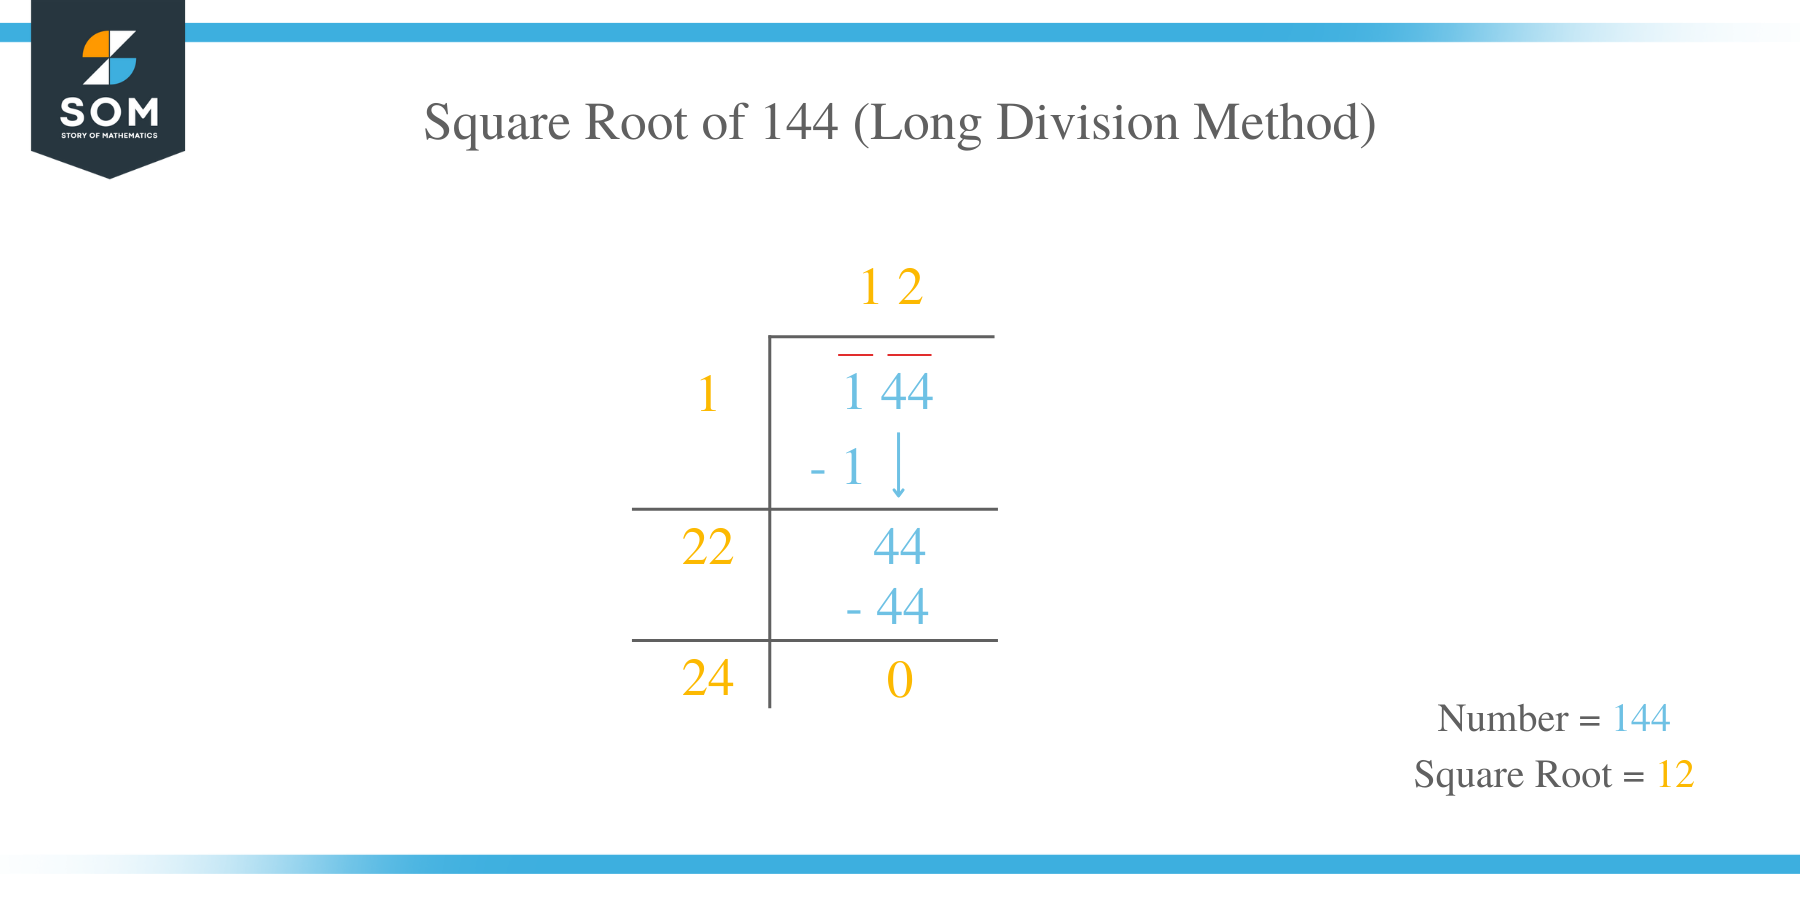 Square Root of 144 by Long Division Method